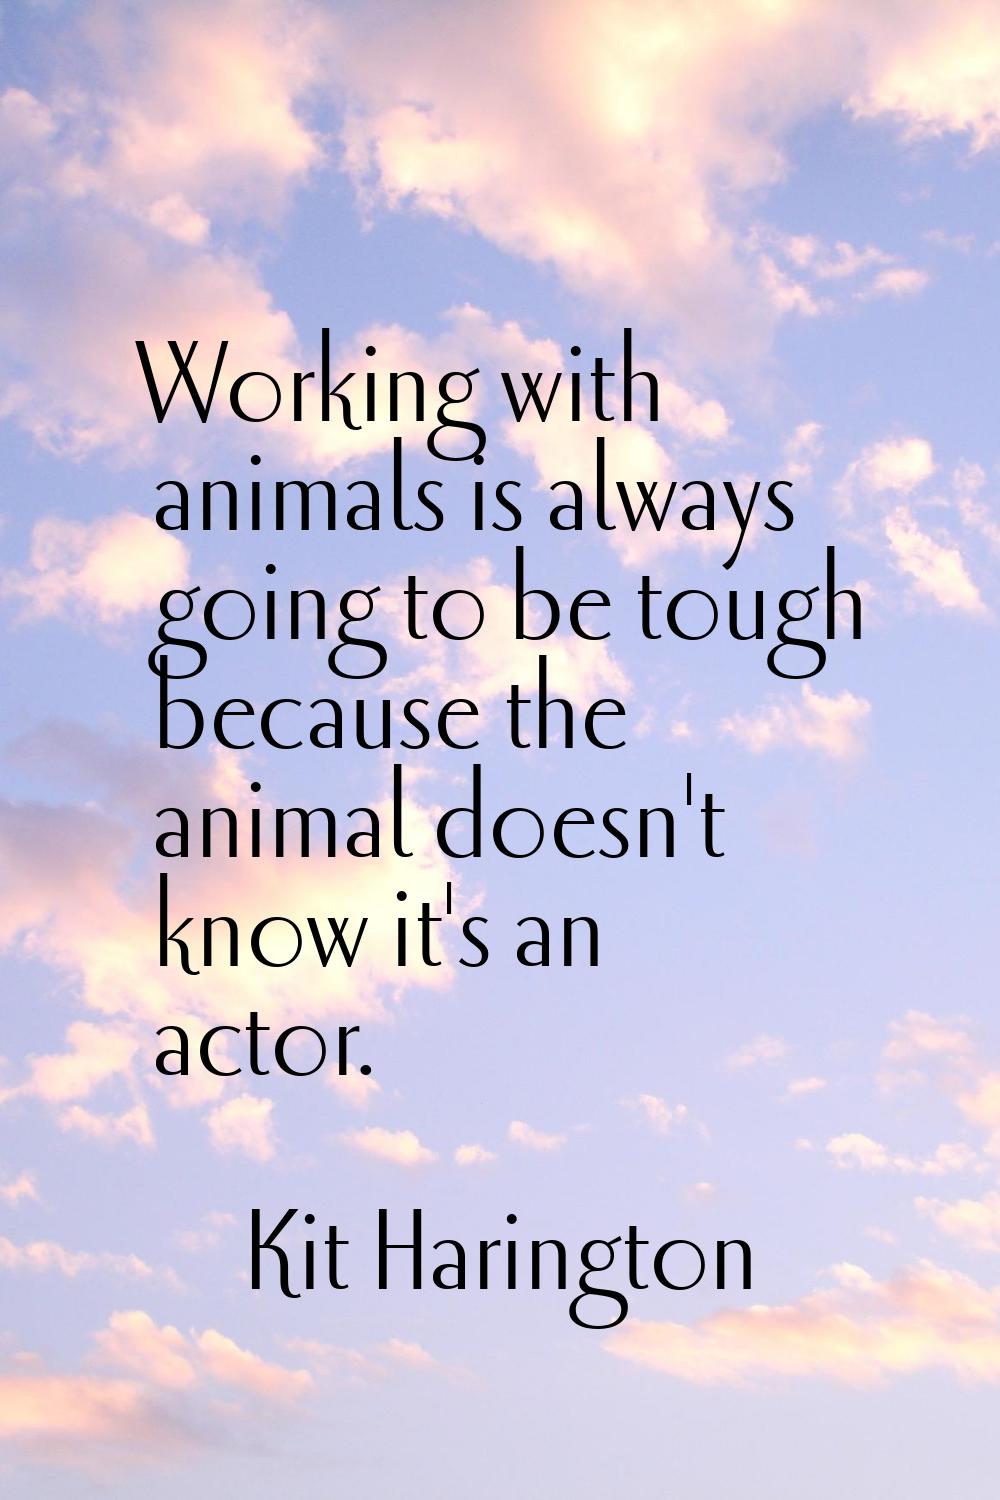 Working with animals is always going to be tough because the animal doesn't know it's an actor.